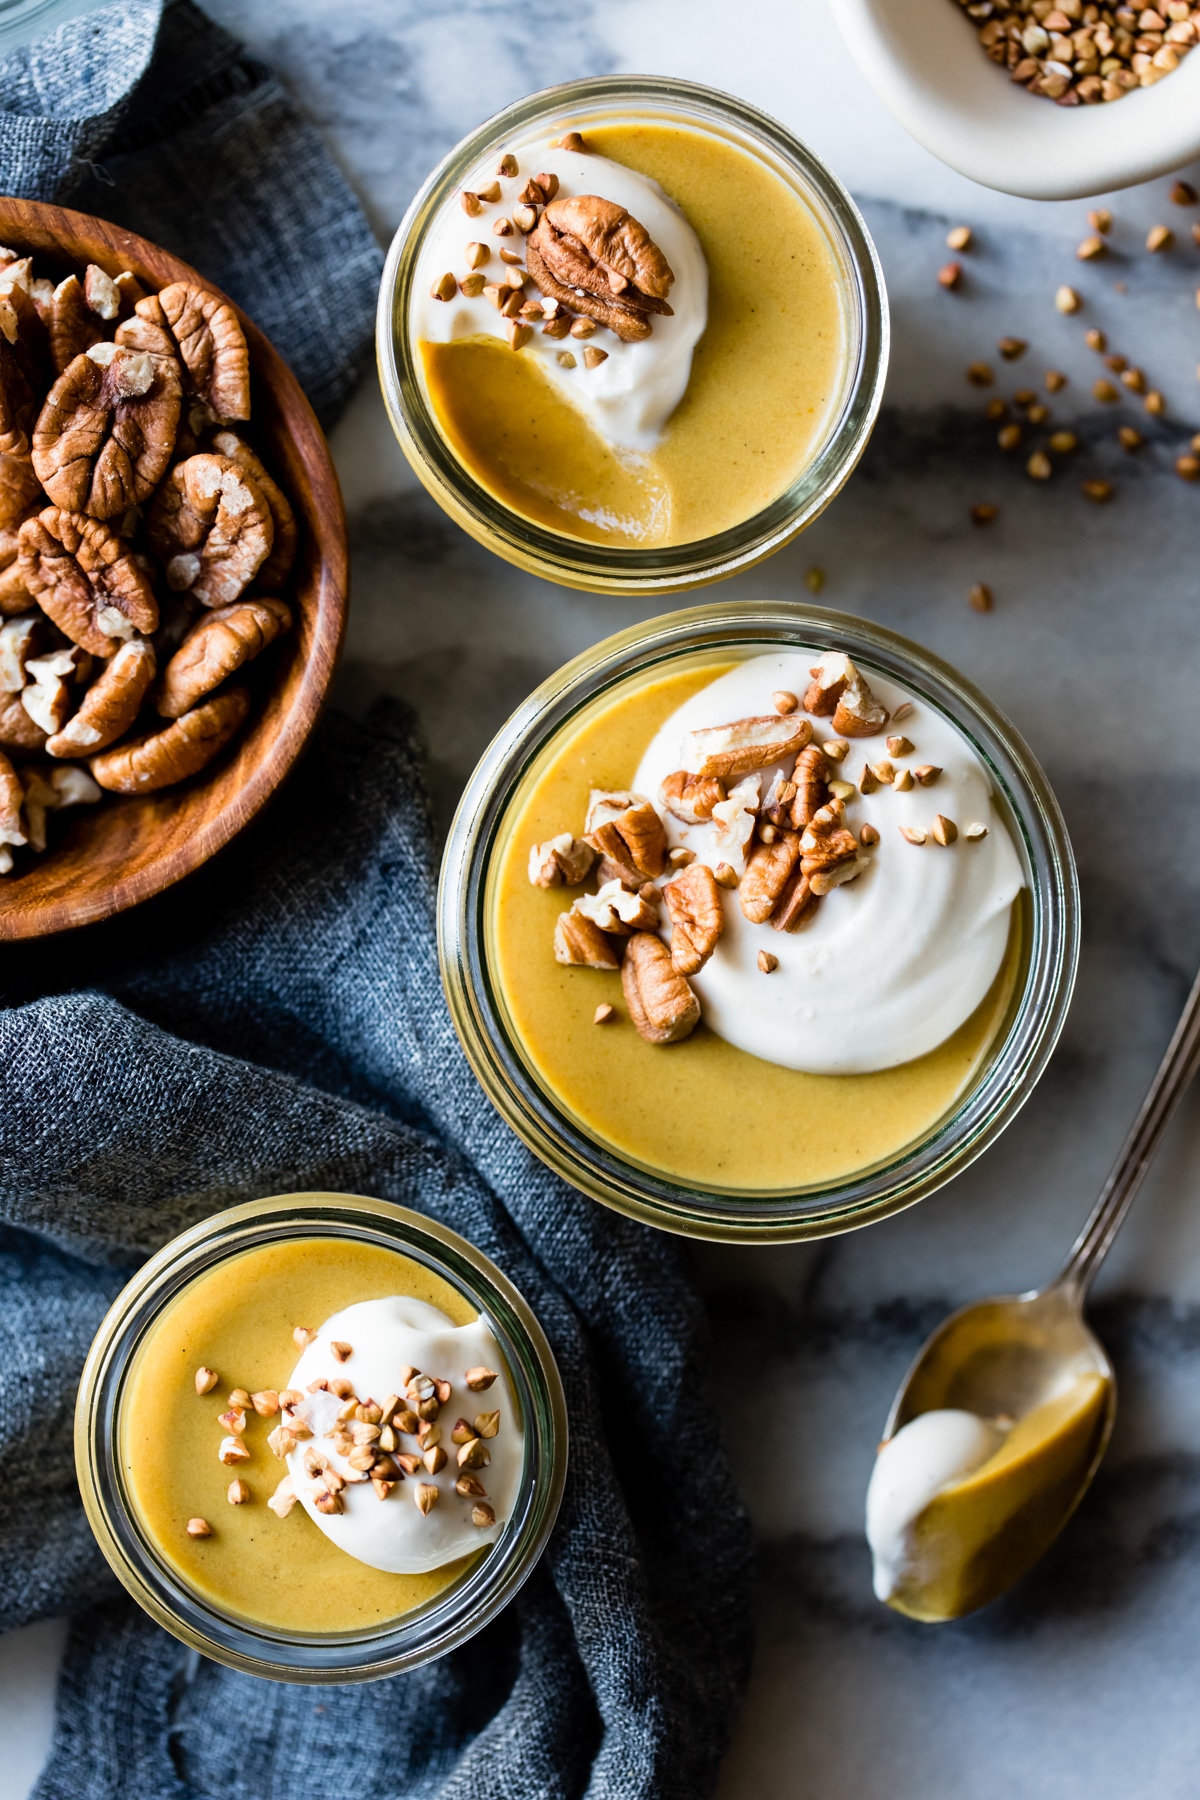 Pumpkin Butterscotch Pudding with Whipped Mascarpone and Toasted Buckwheat from bojongourmet.com on foodiecrush.com